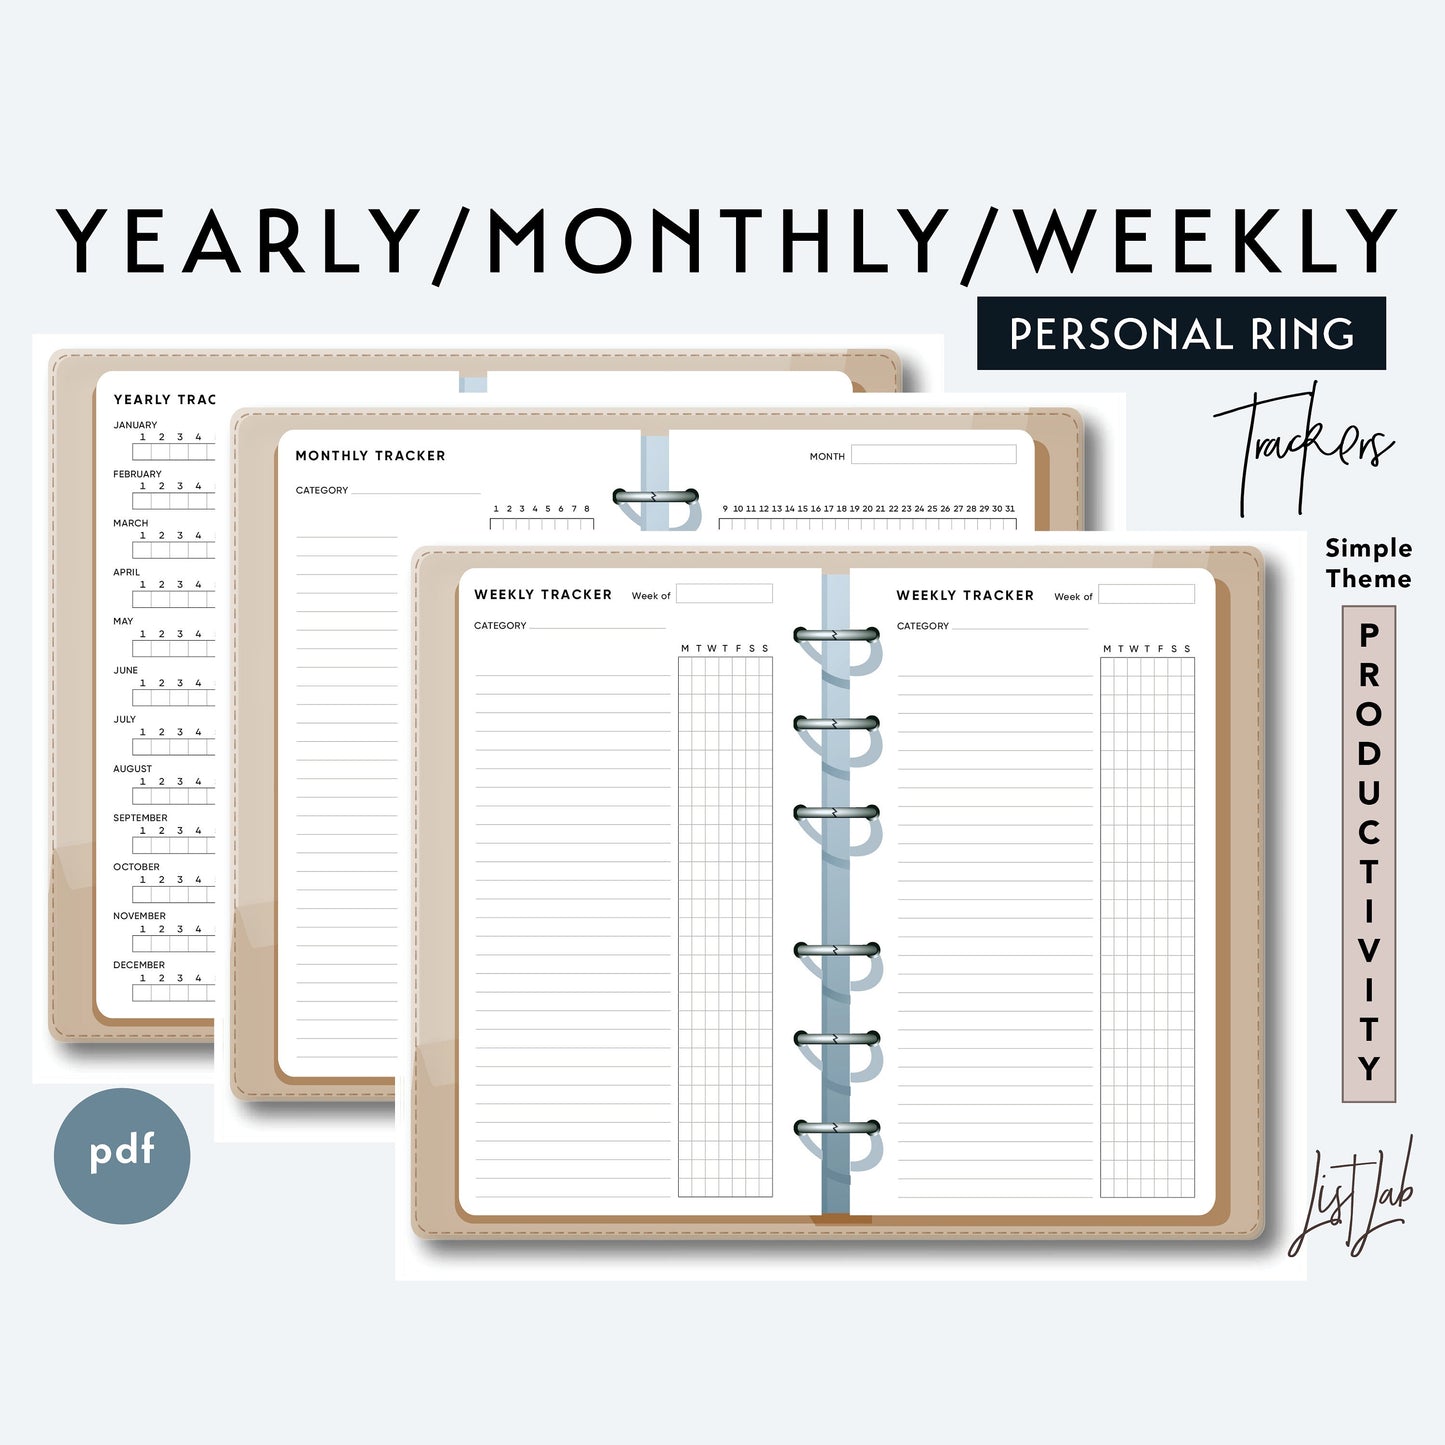 Personal Ring YEARLY, MONTHLY & WEEKLY TRACKERS Printable Insert Set